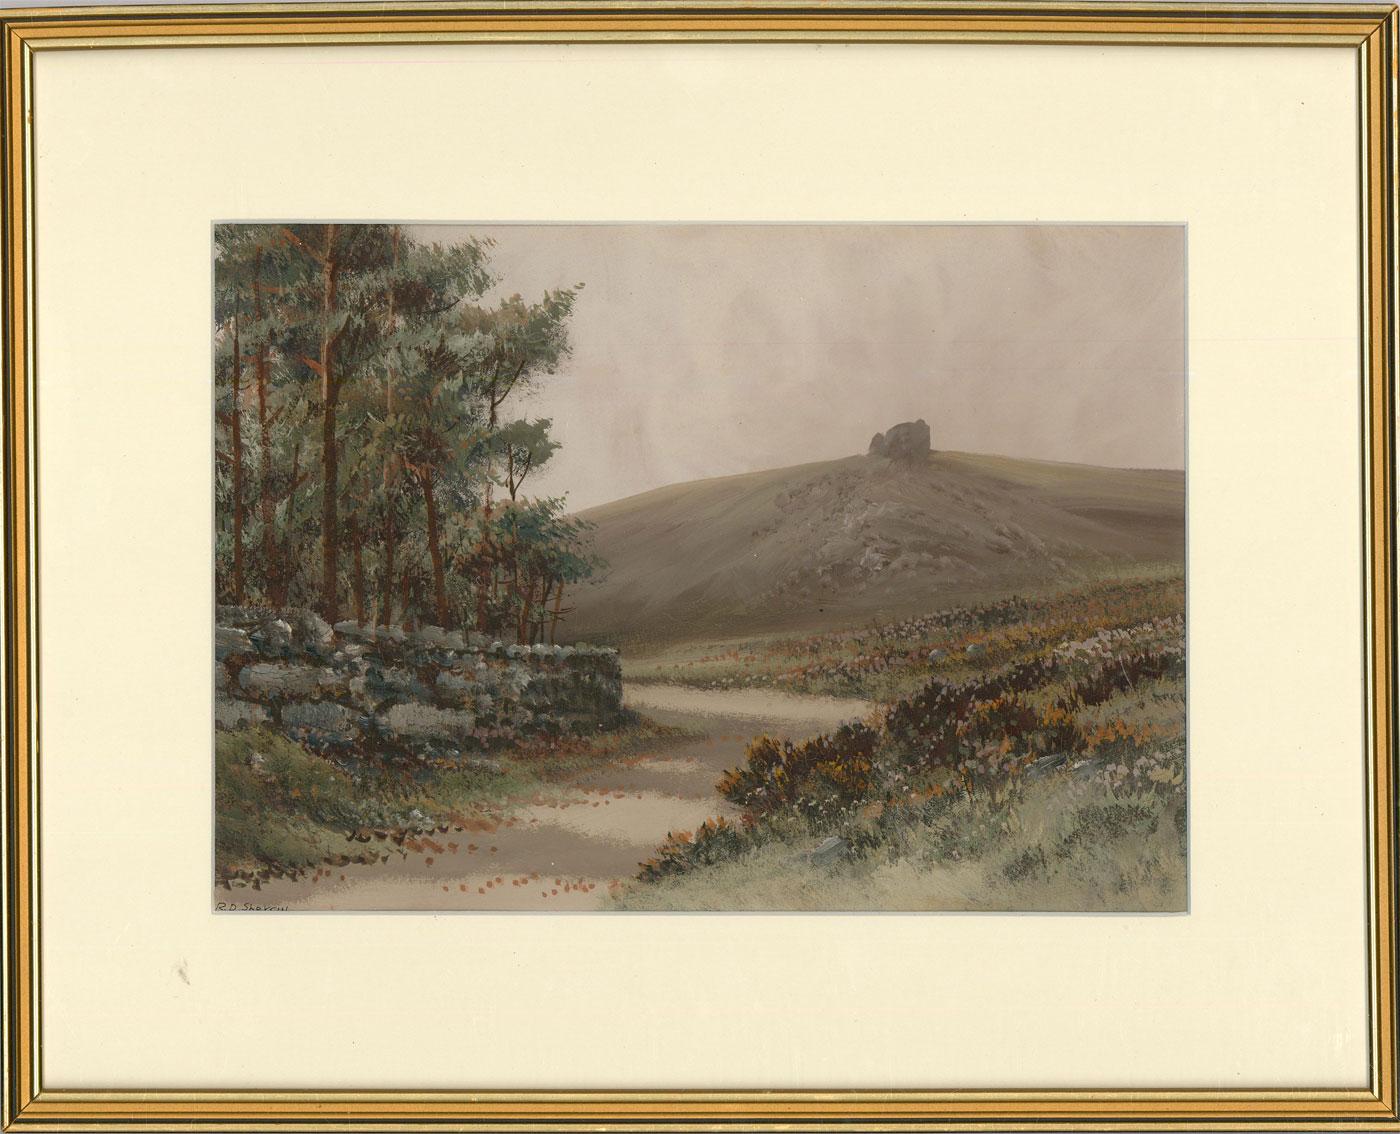 A charming Dartmoor landscape scene depicting a tor on a distant hill. Signed to the lower left. Presented in a gilt frame. On paper.